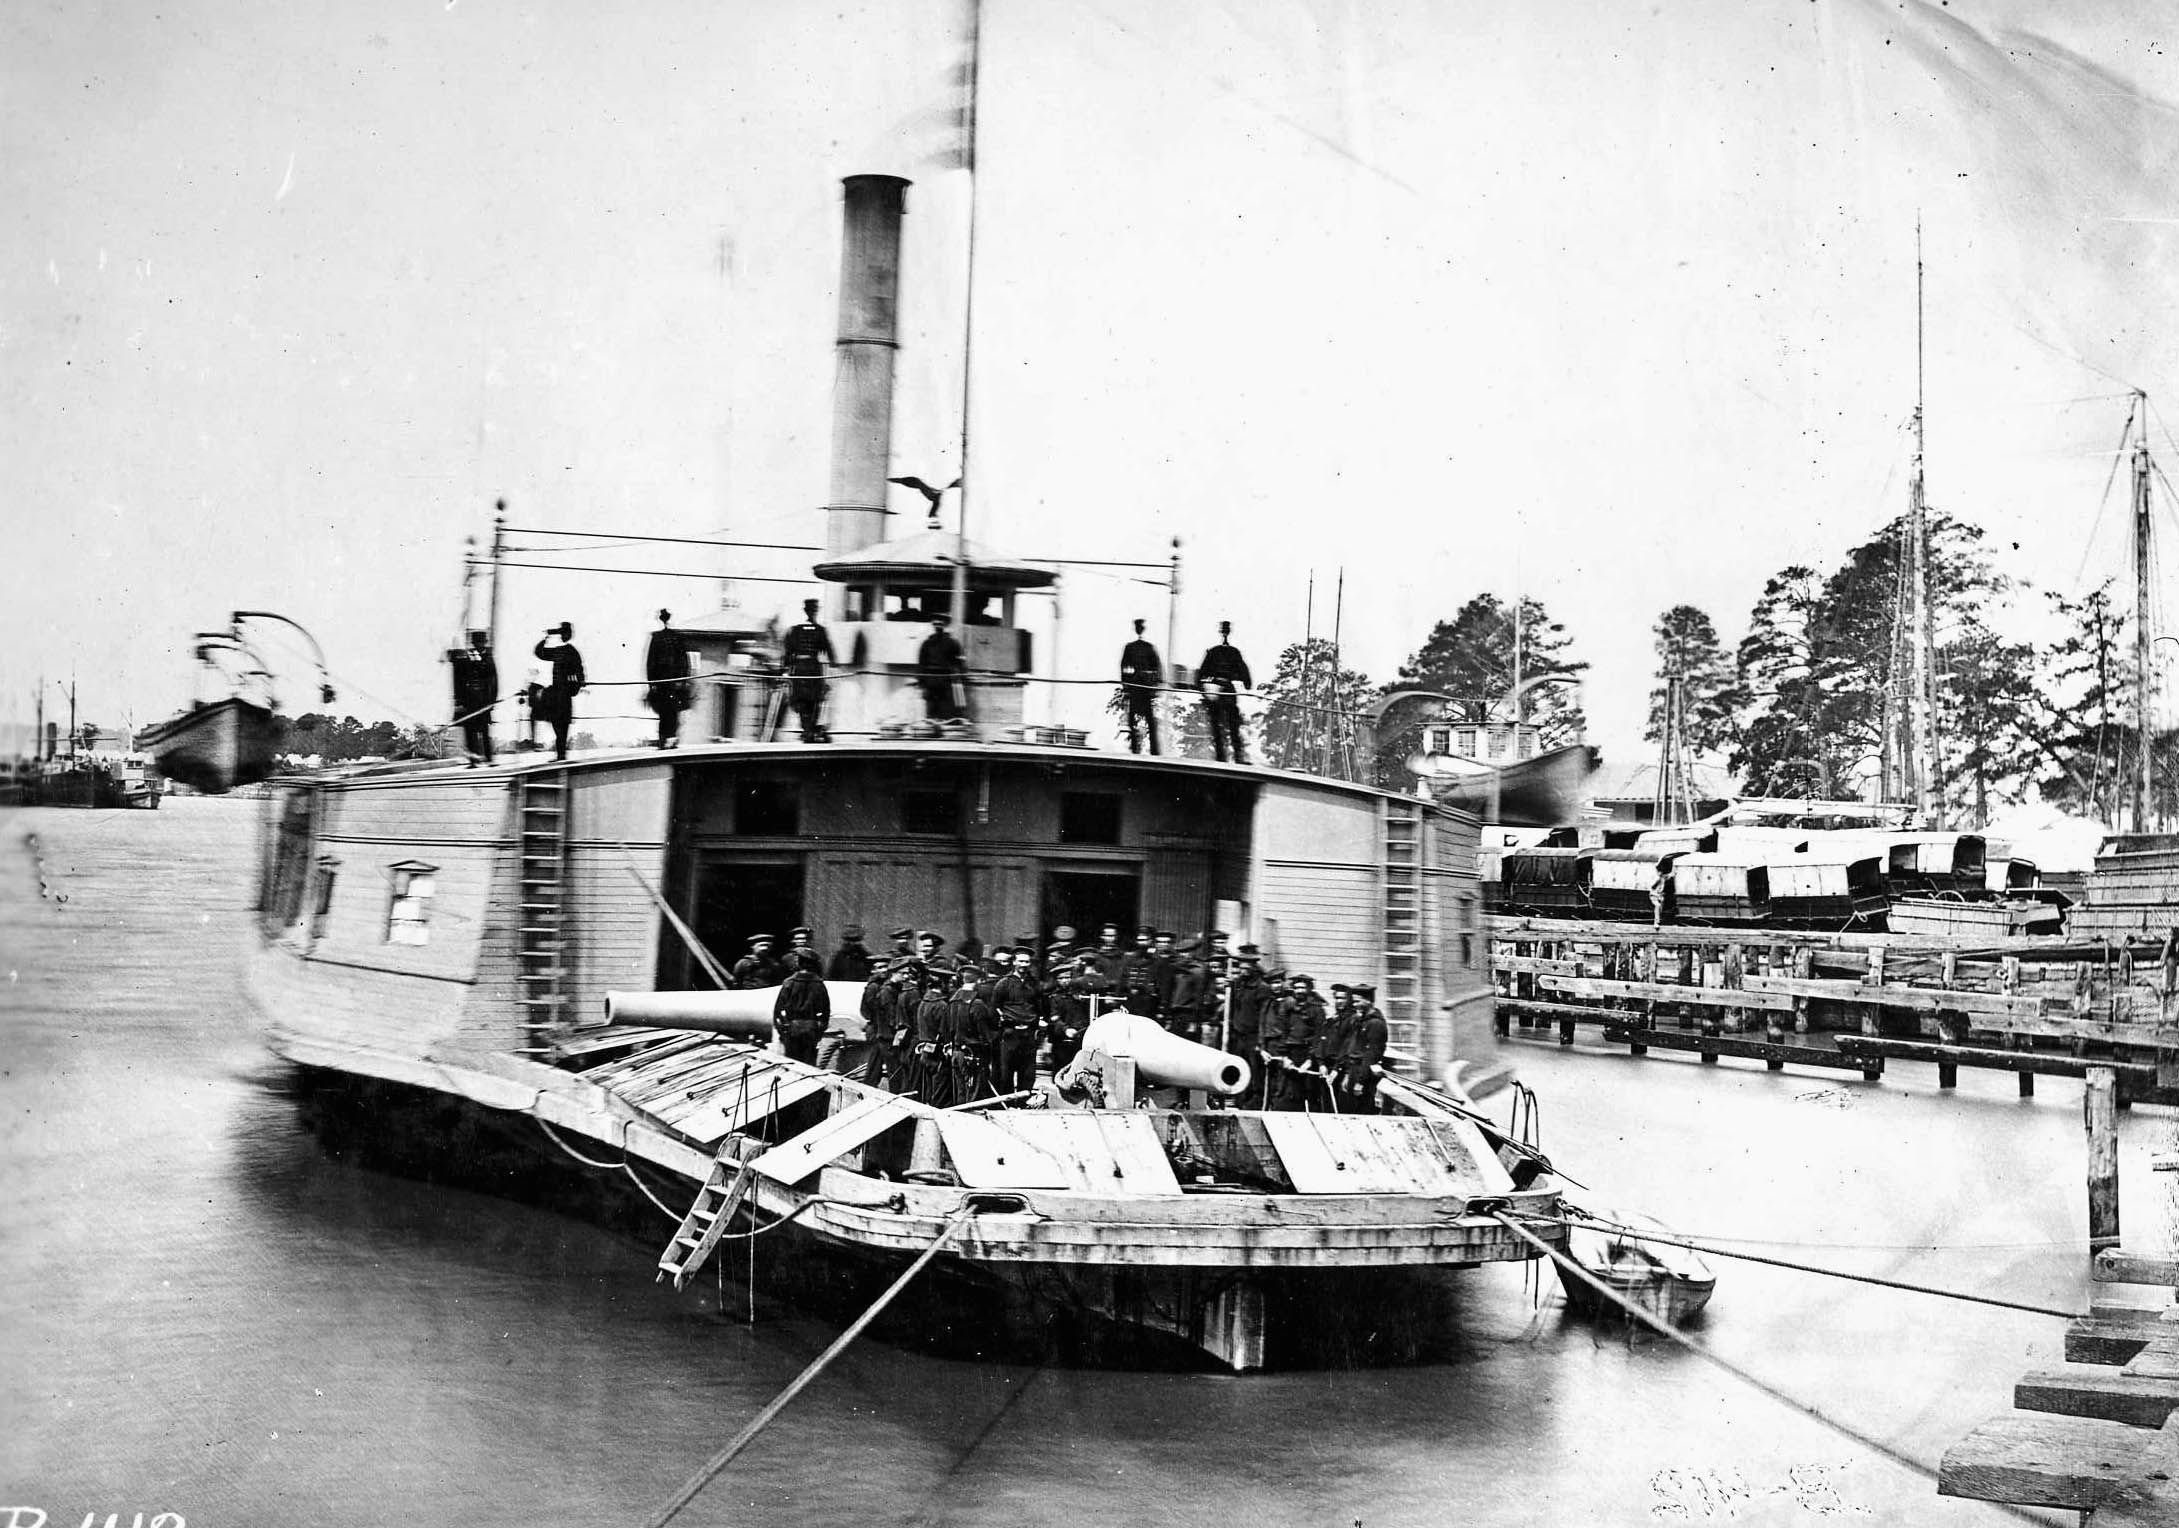 Mathew Brady took this photograph of a bristling Union gunboat on the Pamunkey River in Virginia.